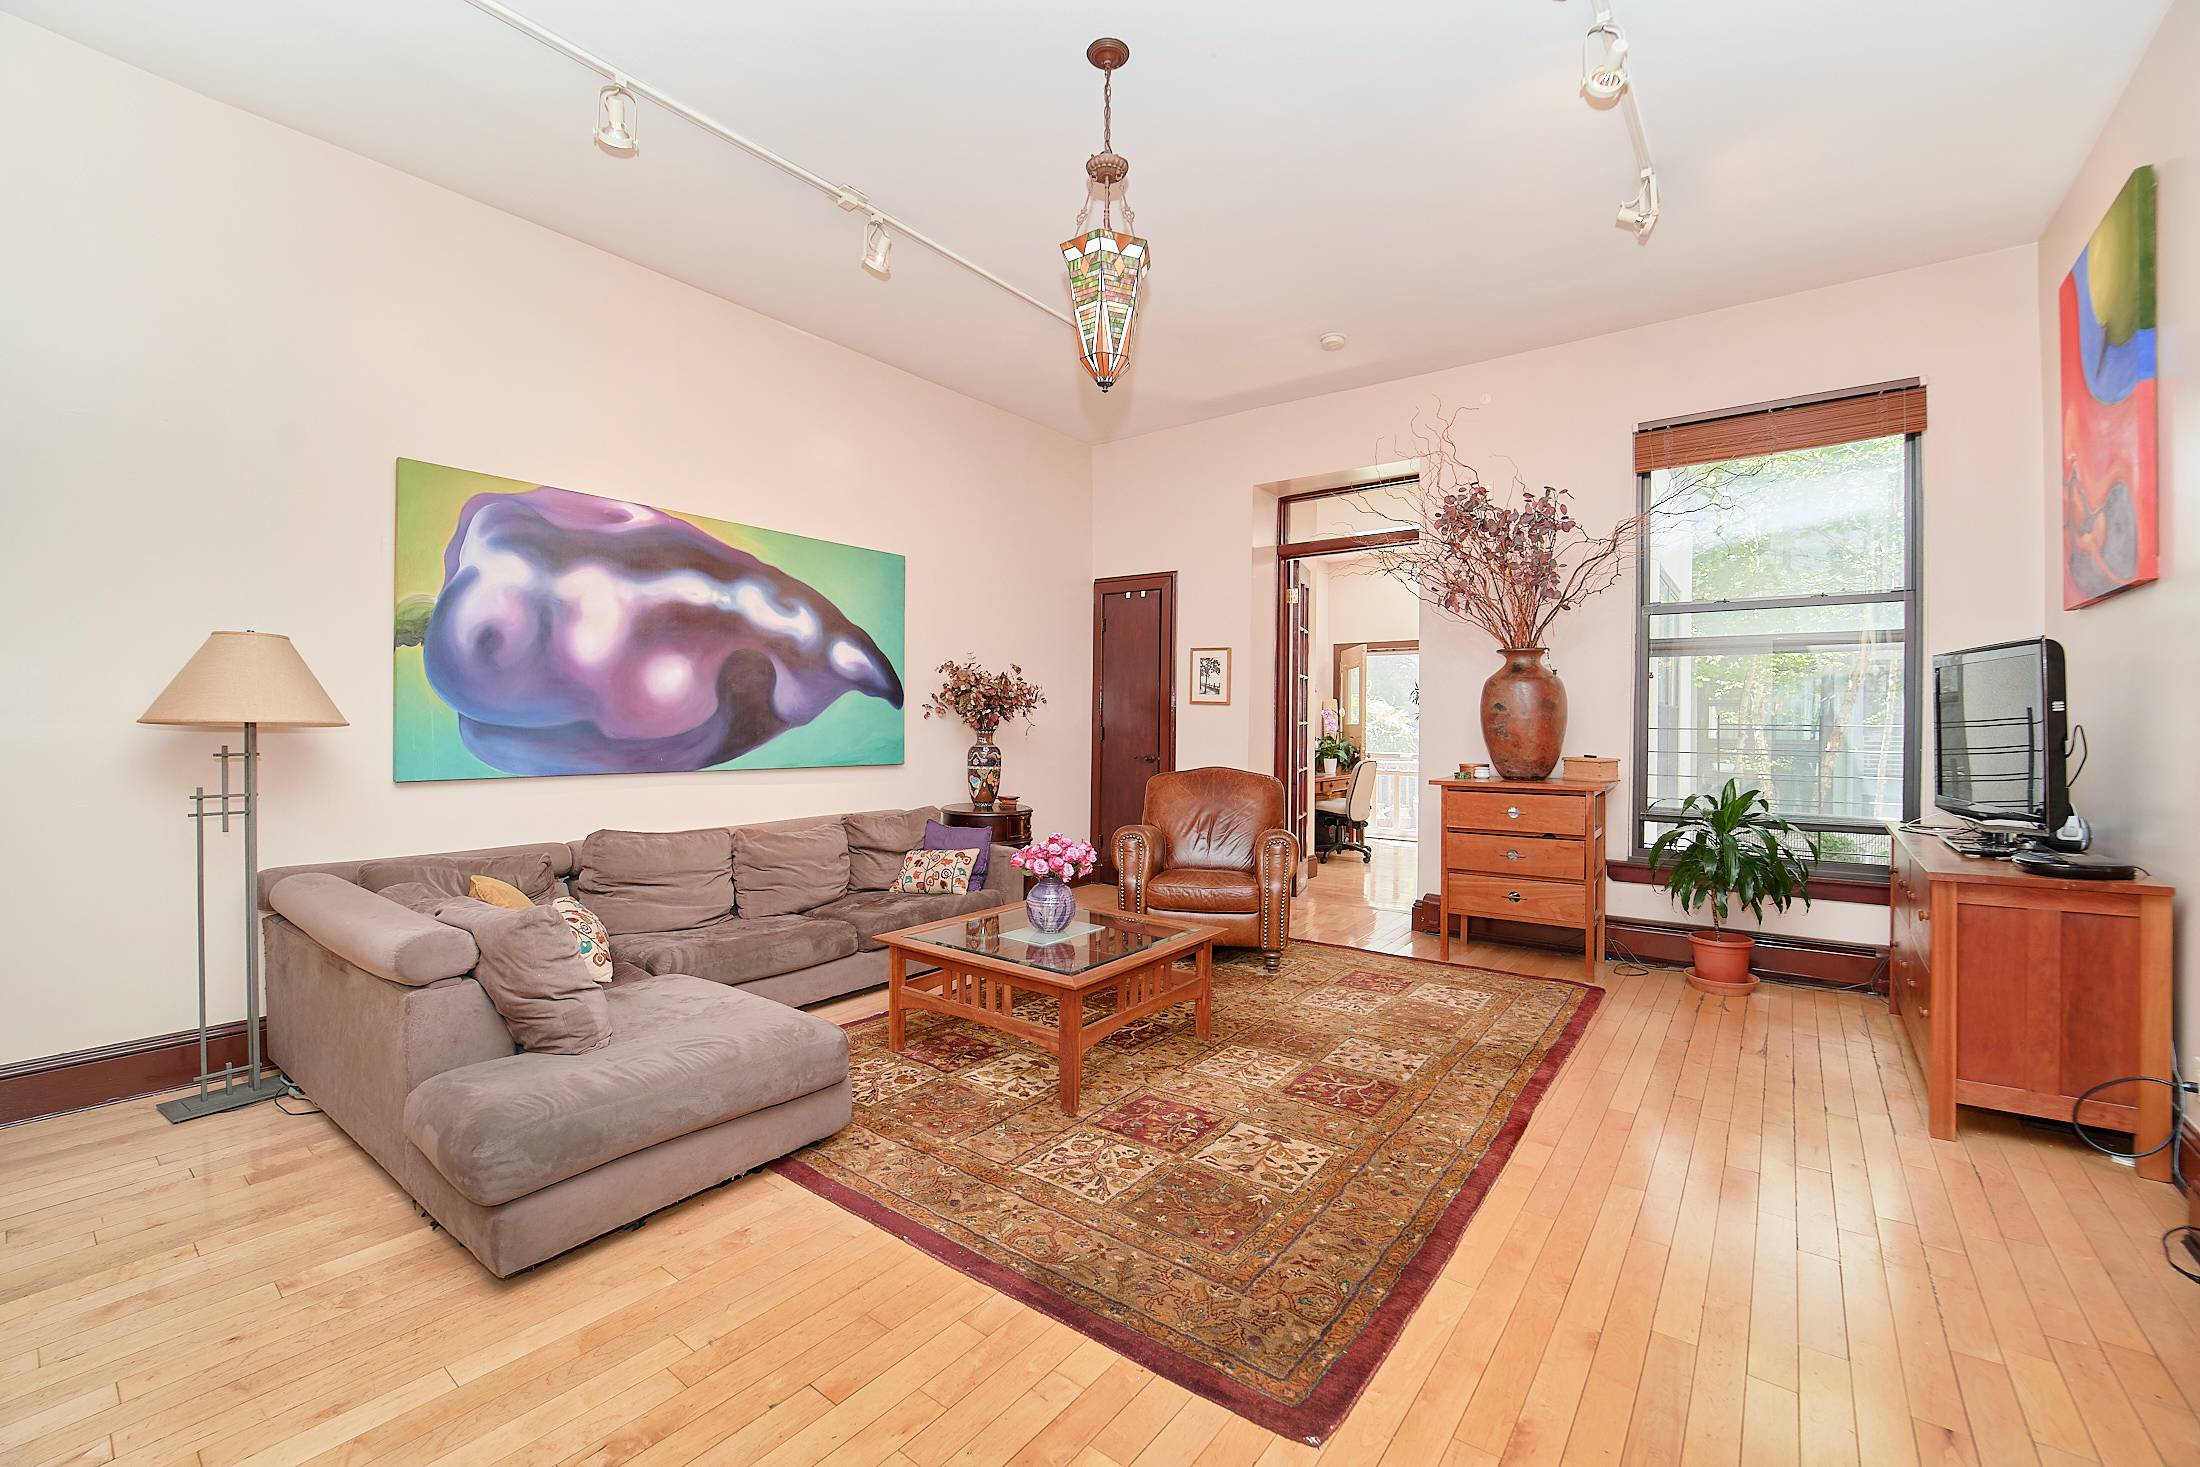 Rarely available brownstone townhouse triplex on one of Harlem's most desirable blocks.